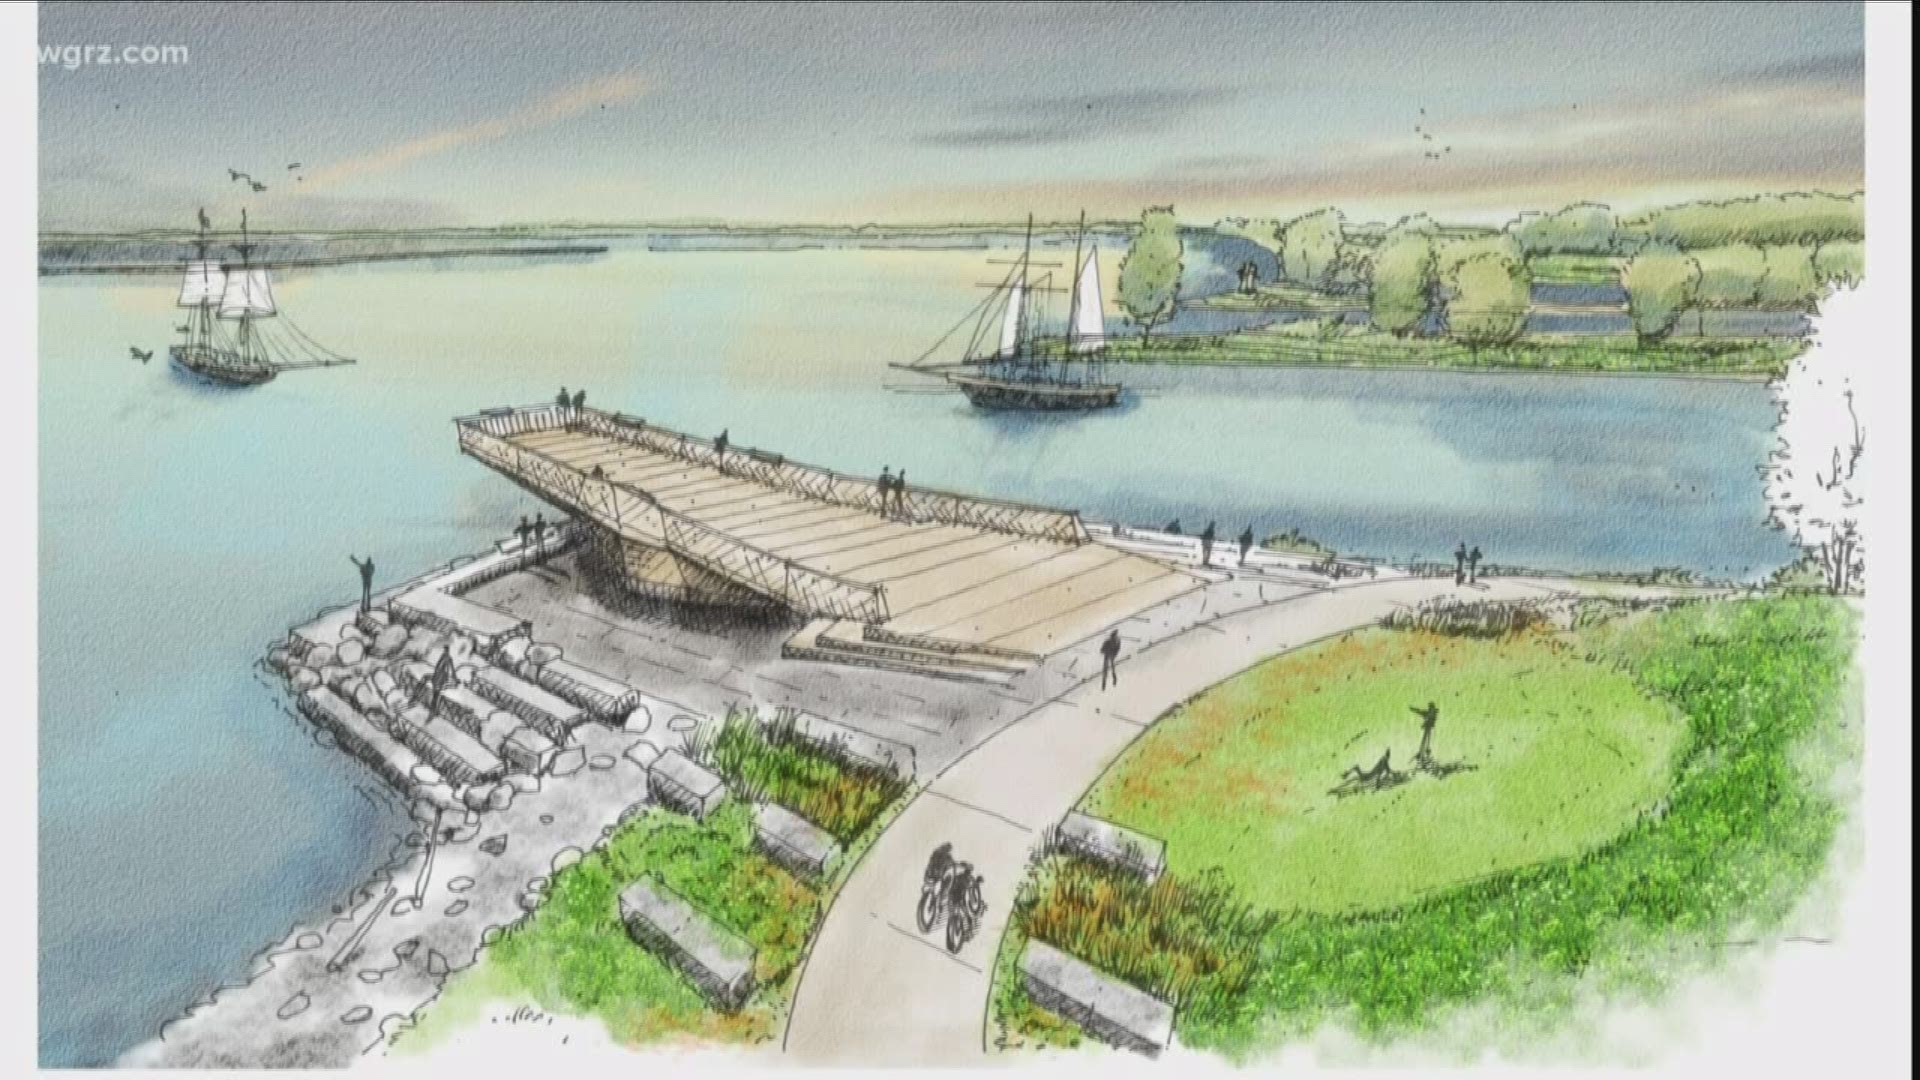 ECHDC Holds Outer Harbor Open House